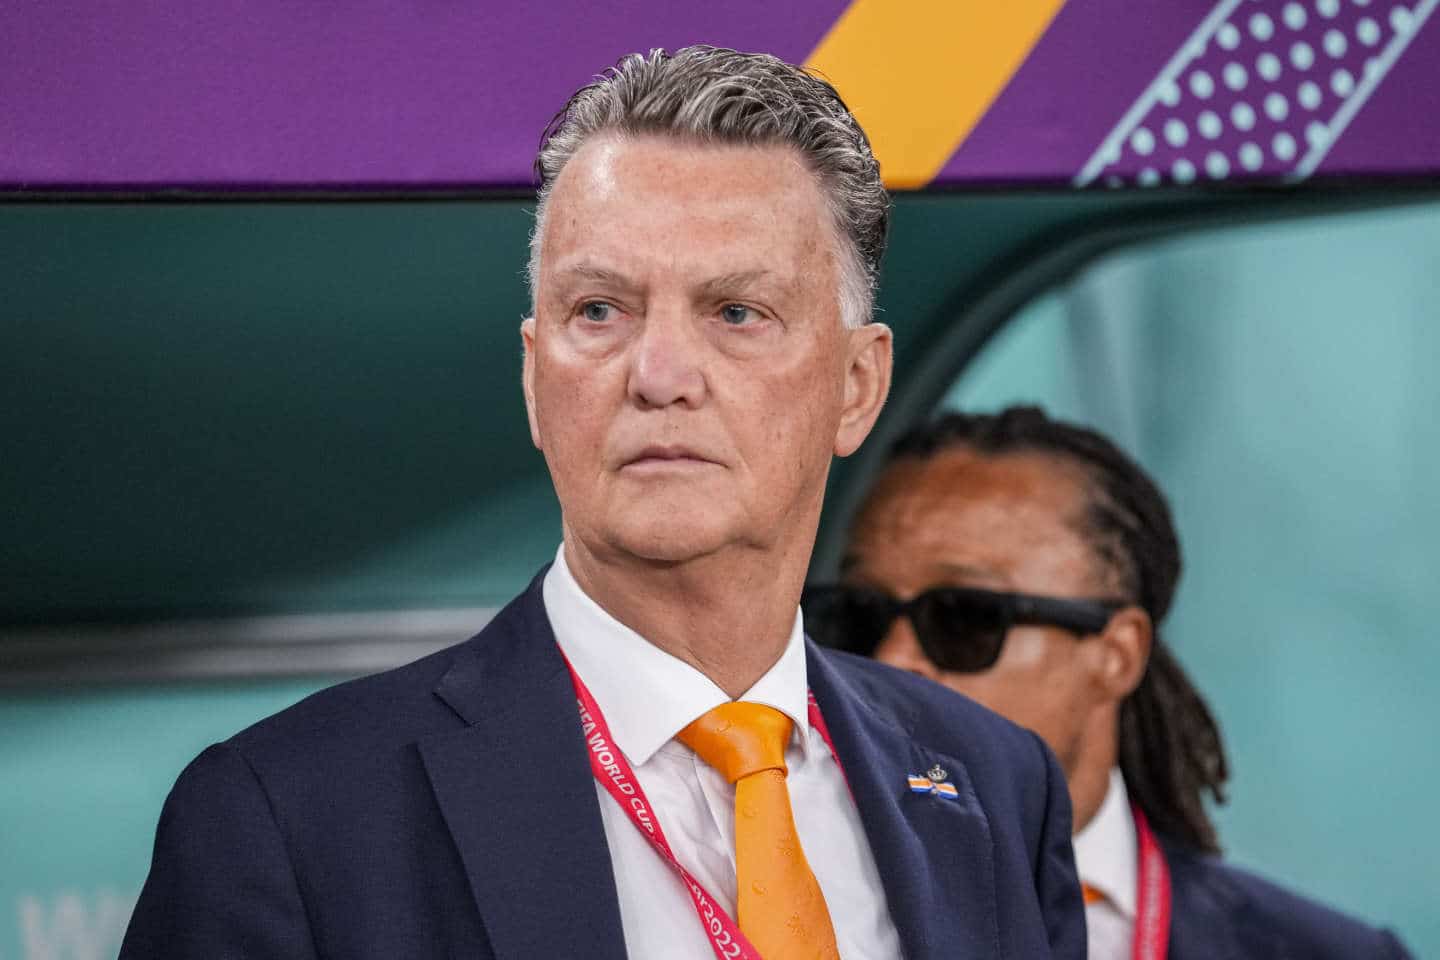 Louis van Gaal resigns as Netherlands manager after quarter-final loss to Argentina